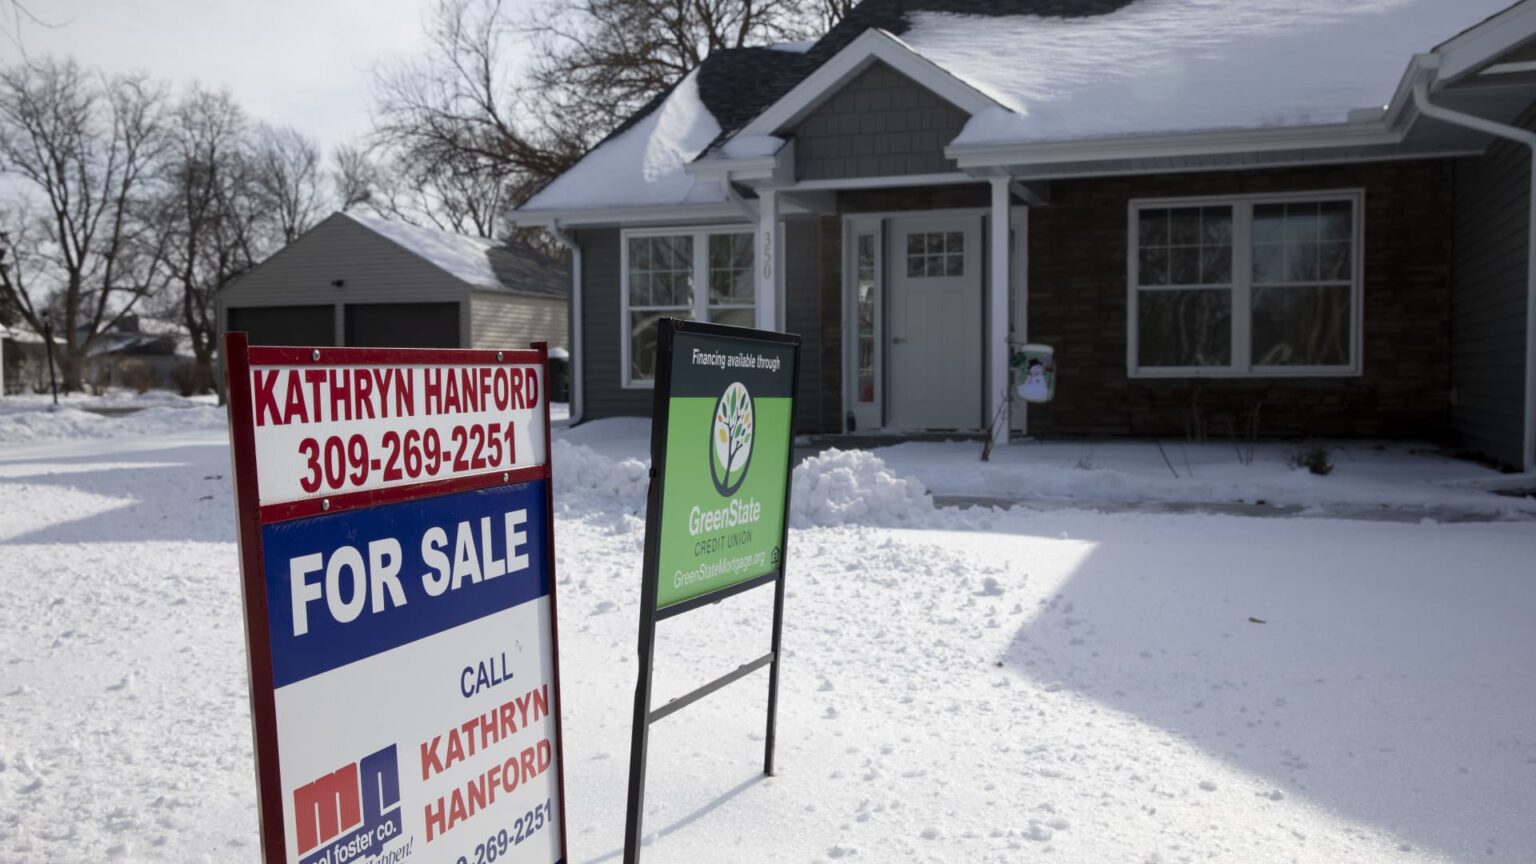 Home sales dampened by severe winter weather, Redfin says